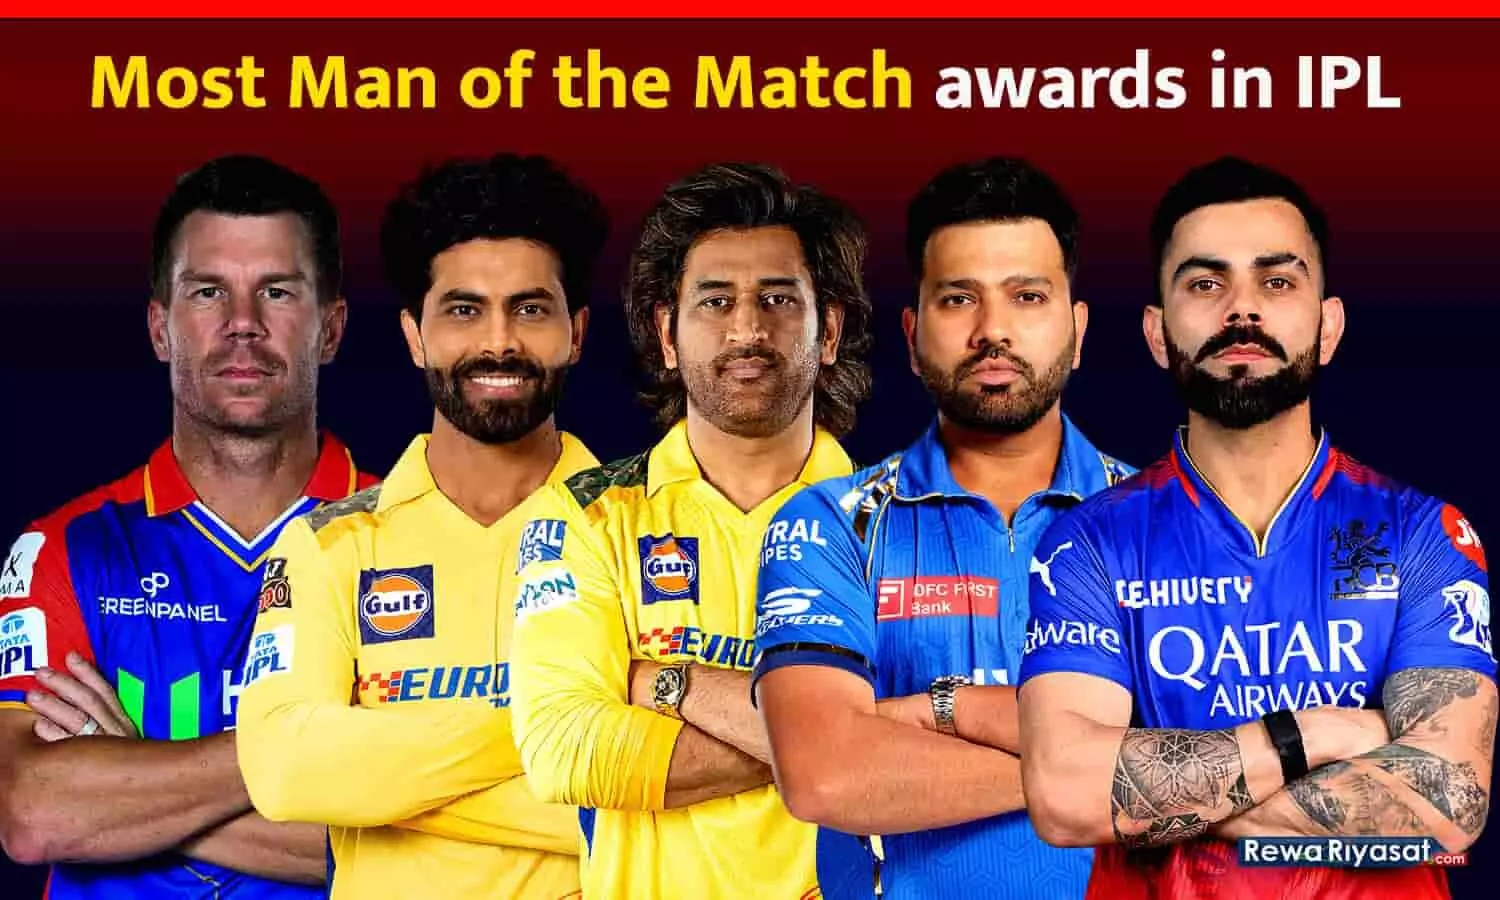 Most Man of the Match awards in IPL